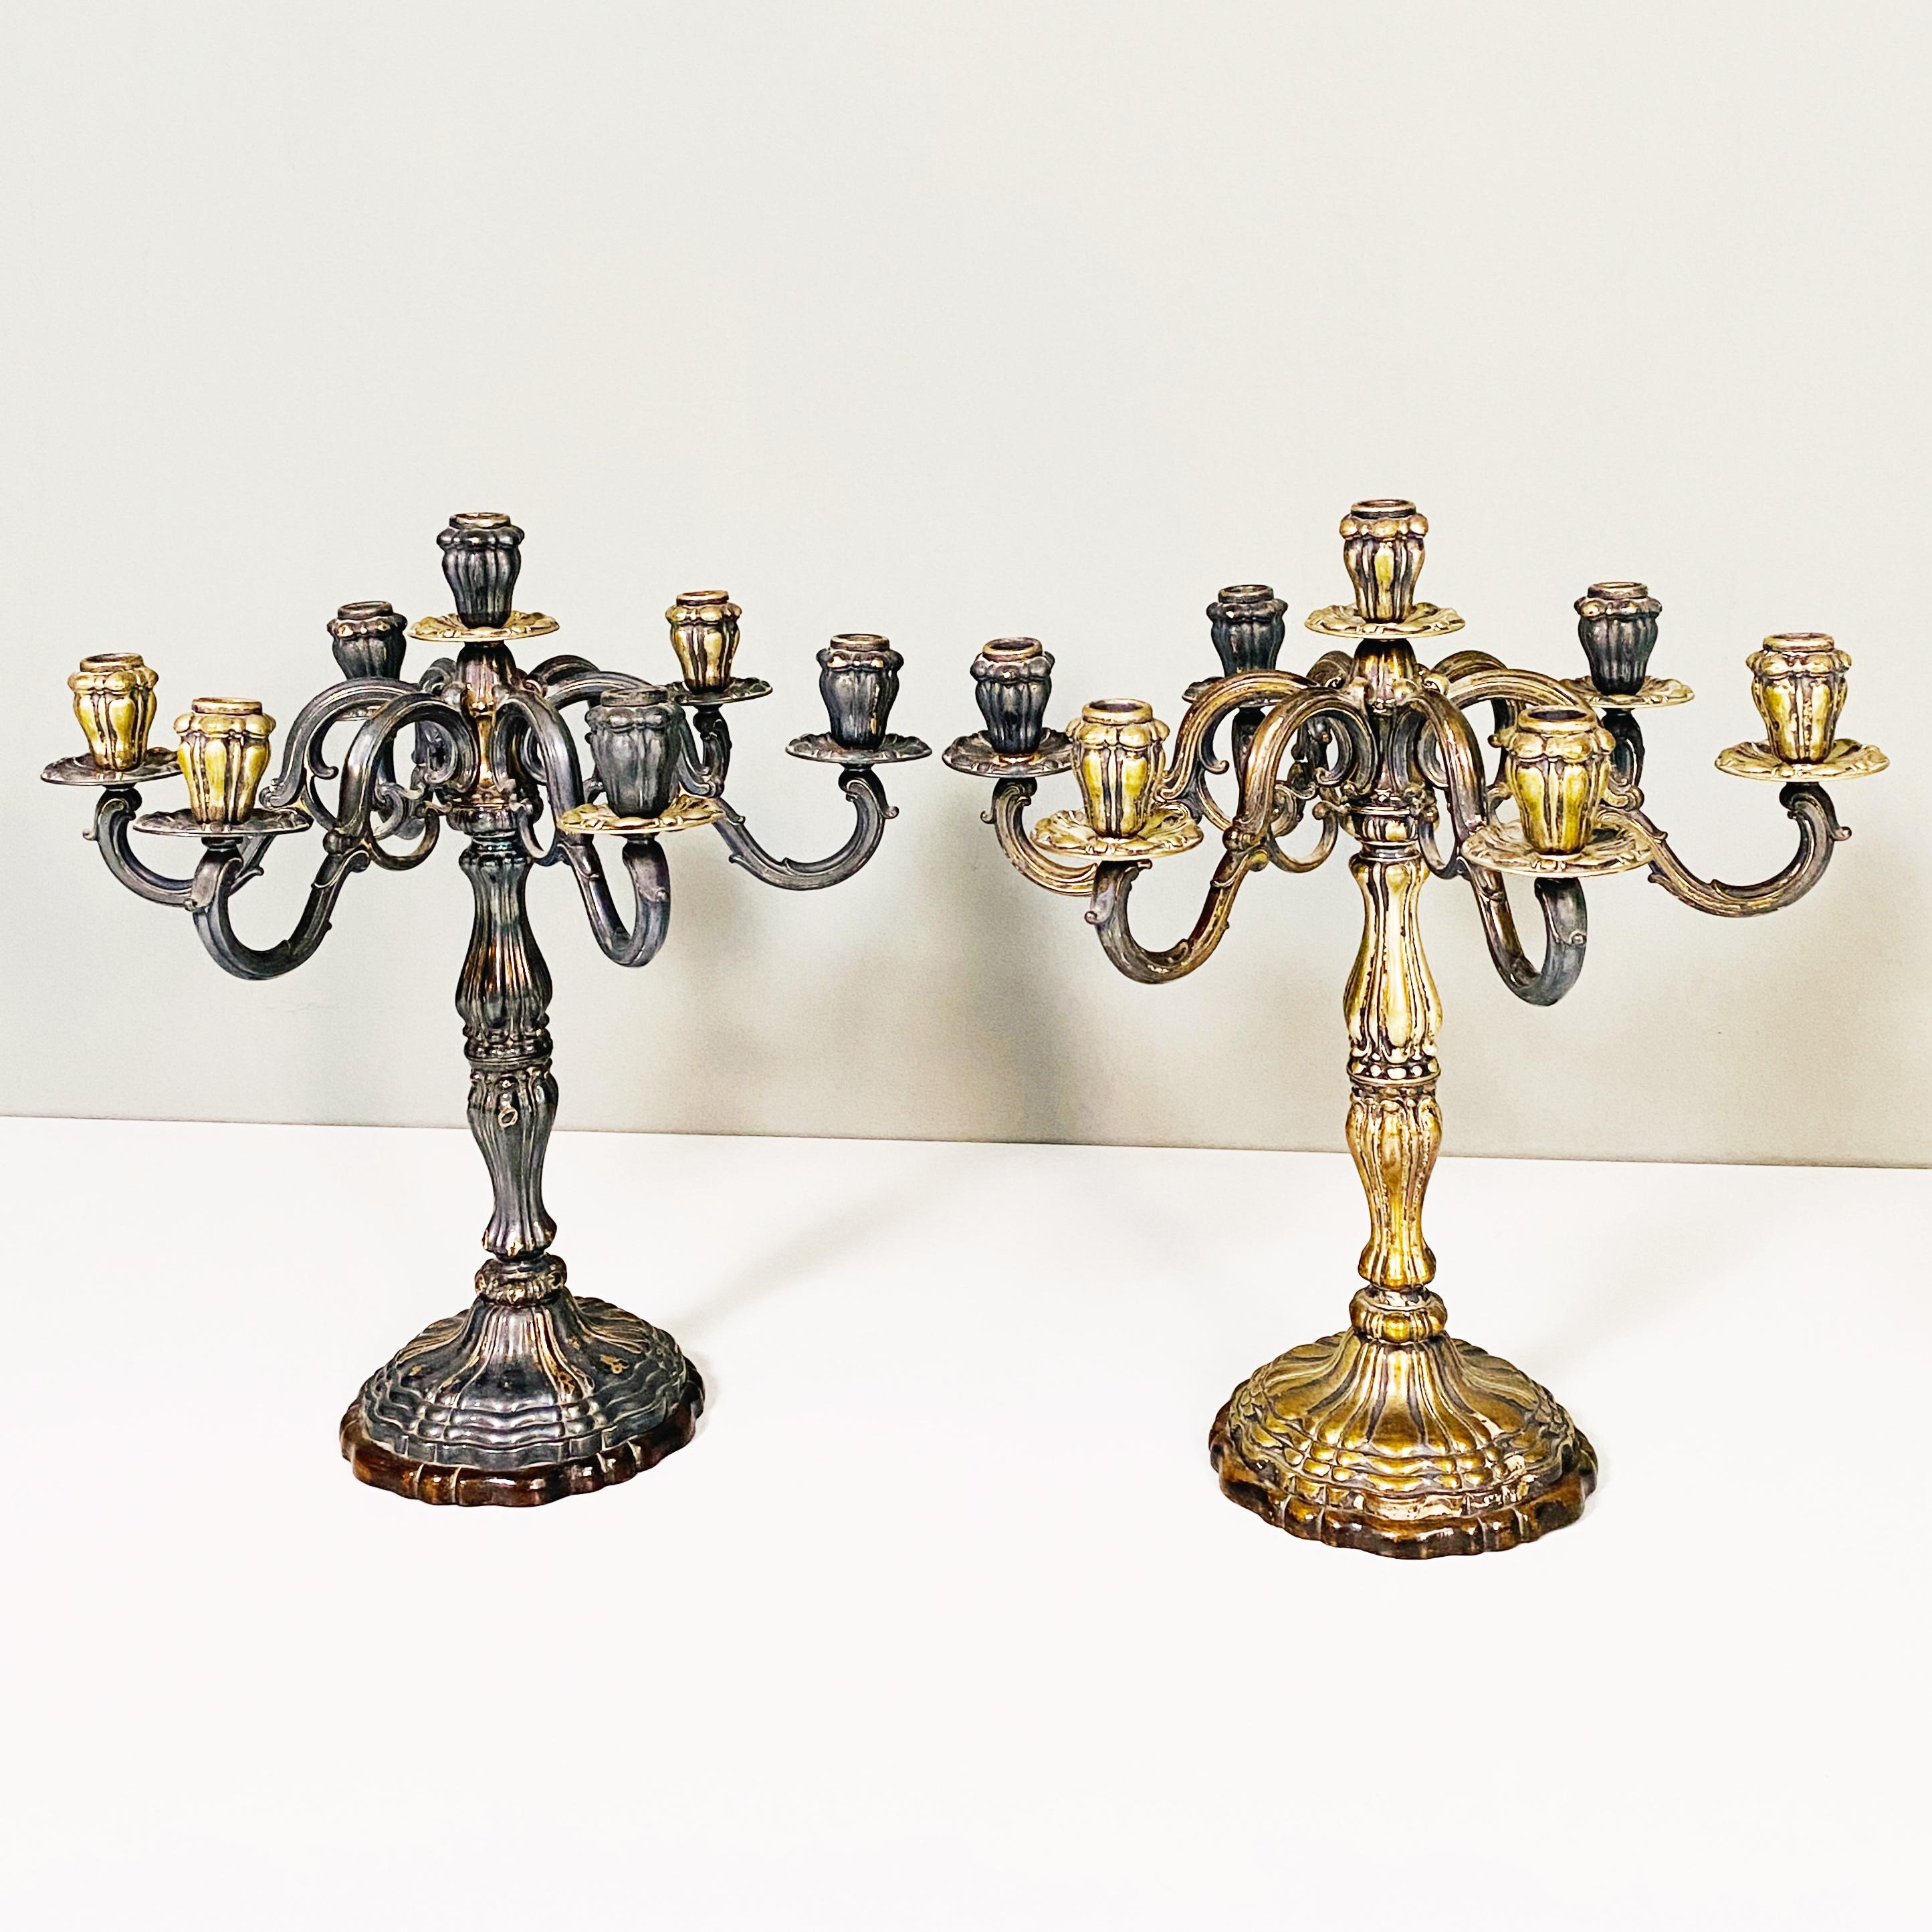 19th Century Italian Antique Seven-Flame Silver Candelabras, 1880s For Sale